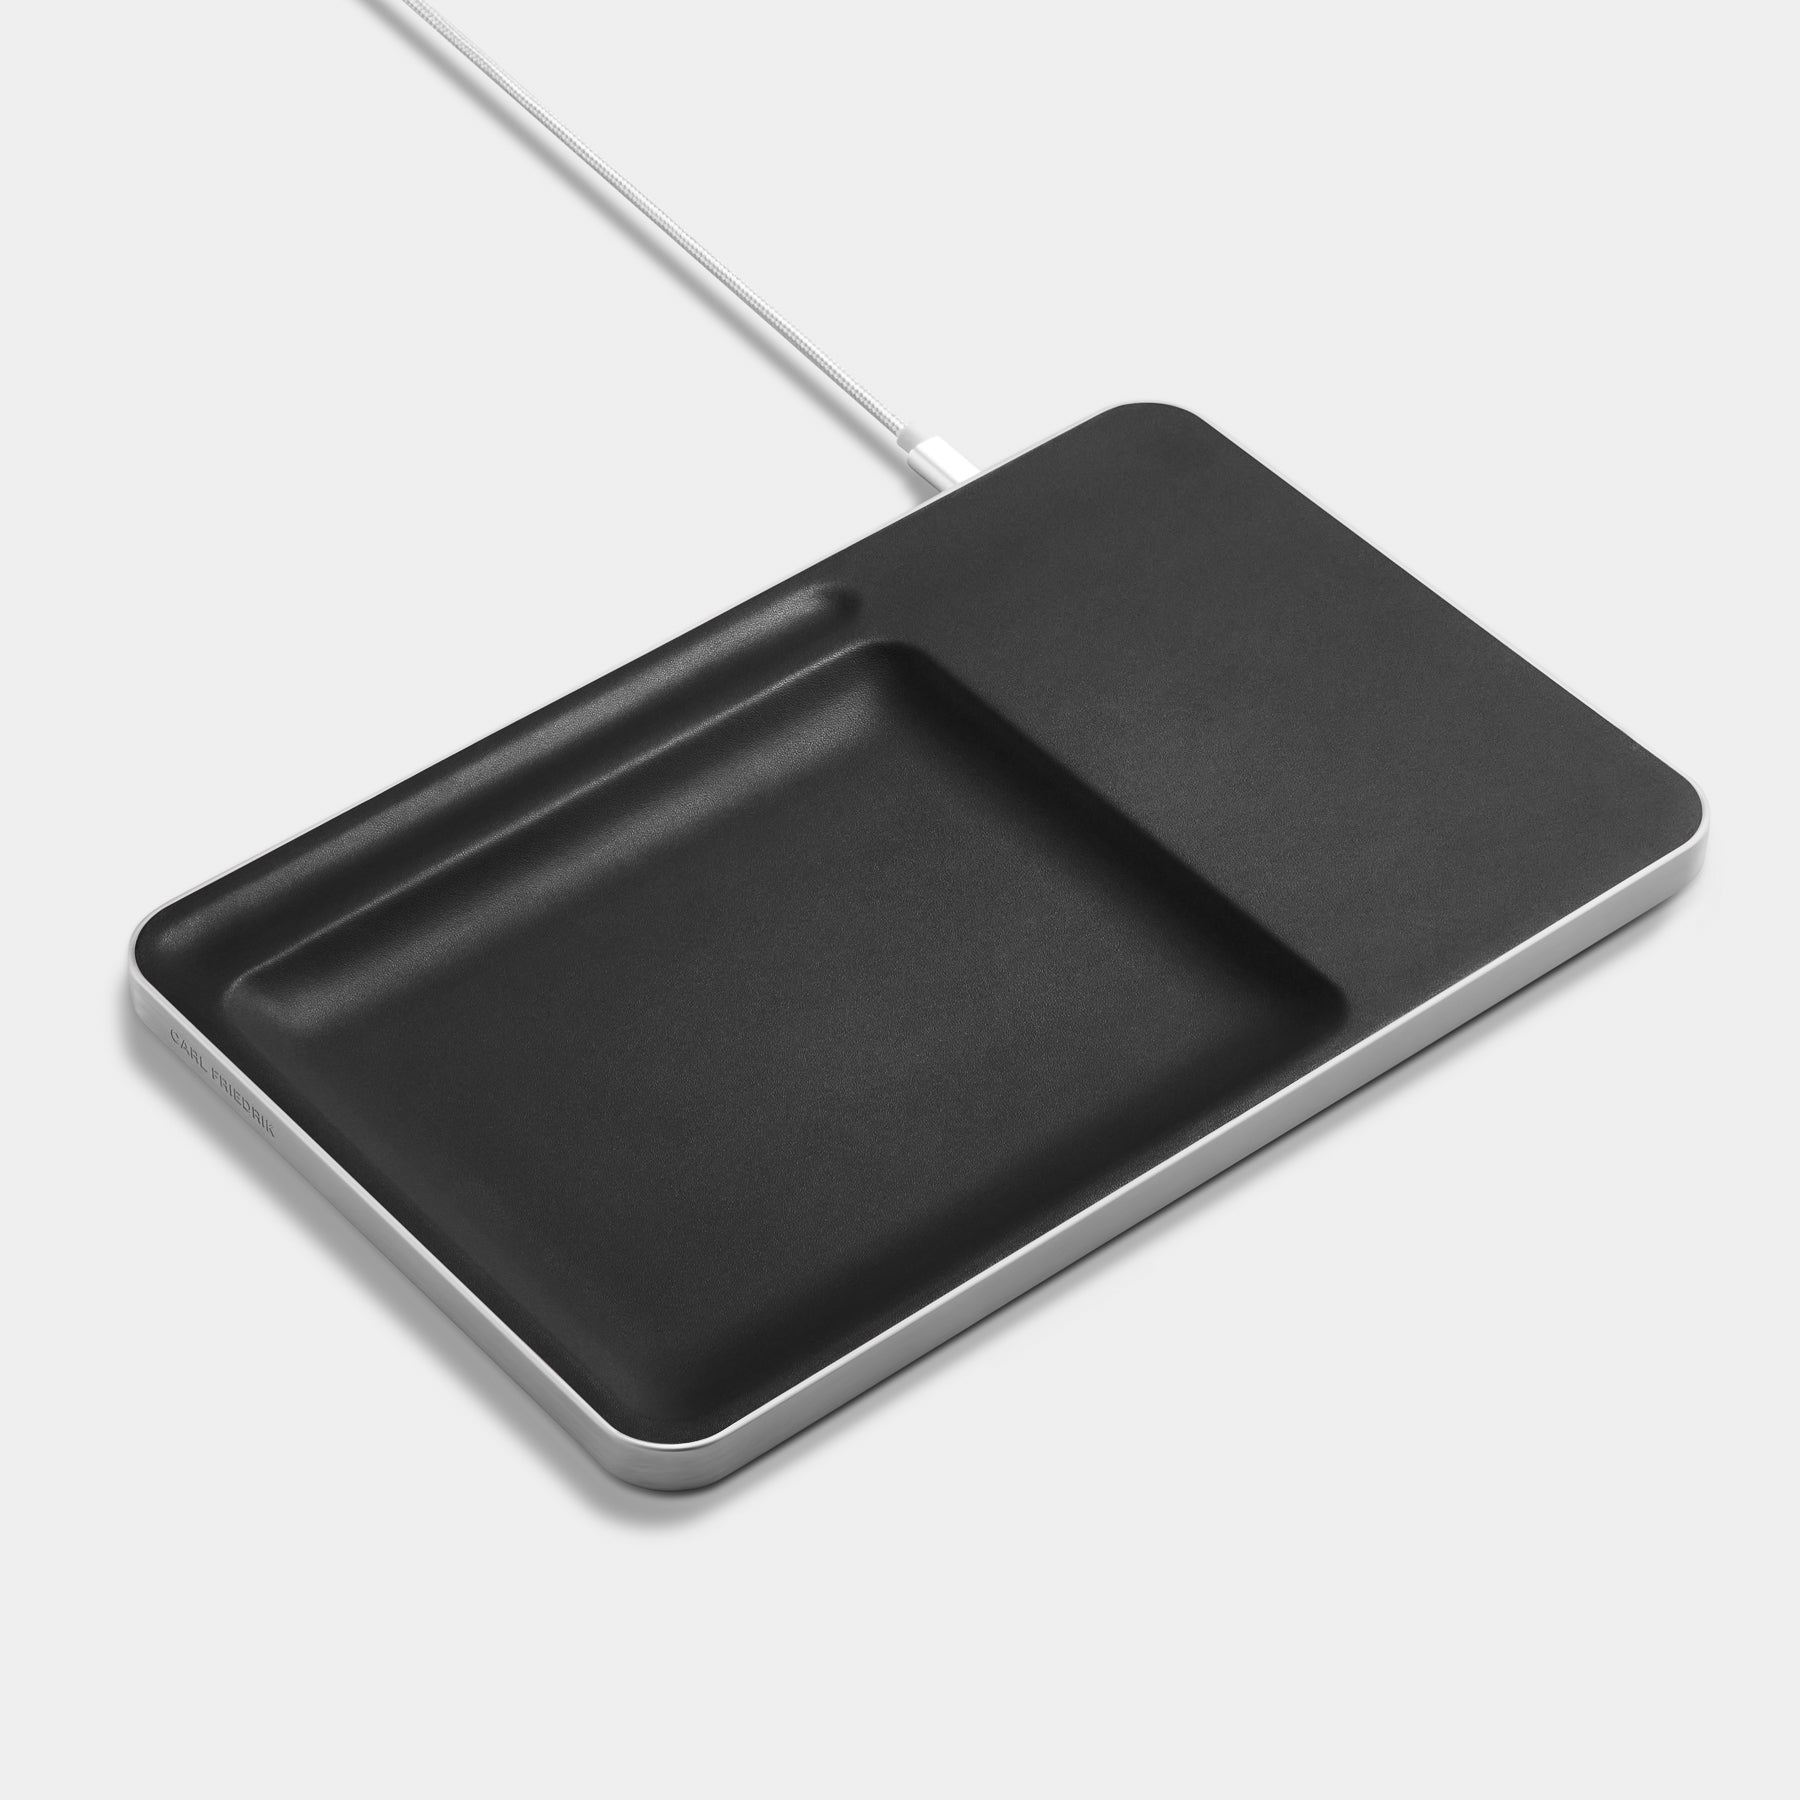 Black Leather charging station over white background